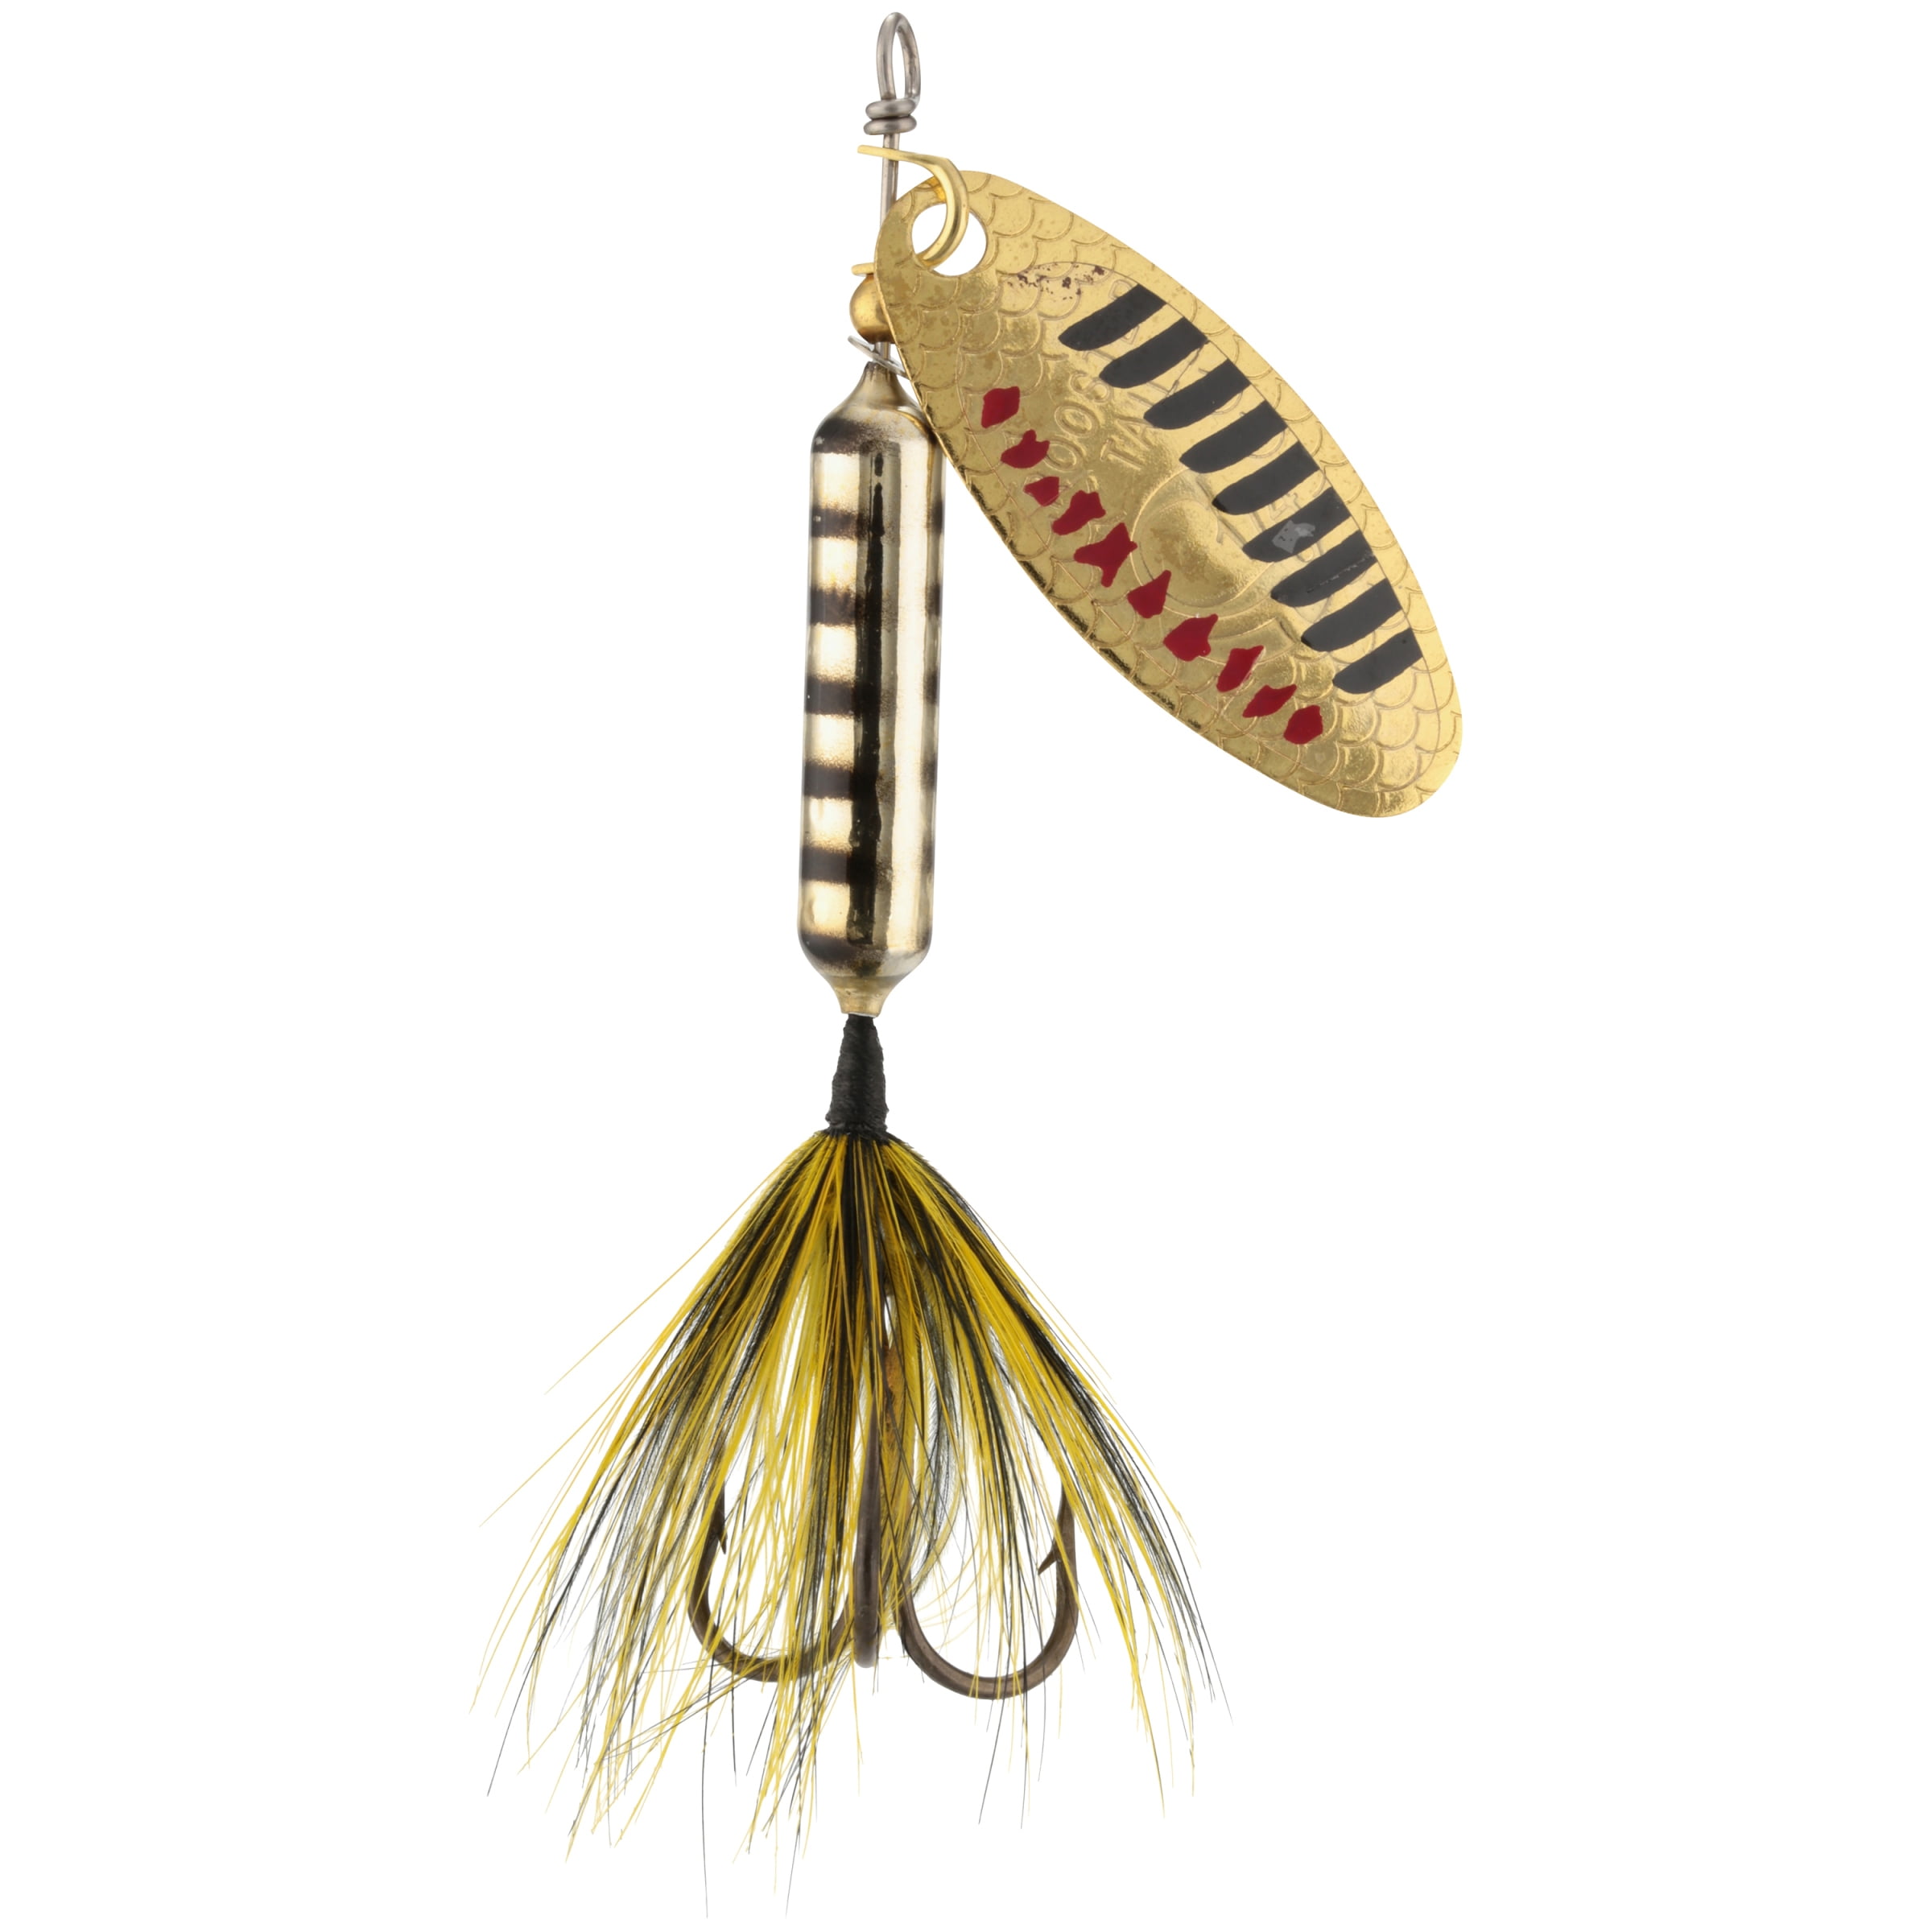 Worden's Rooster Tail Original Met Gold Black Lure 1/4 oz. Carded Pack